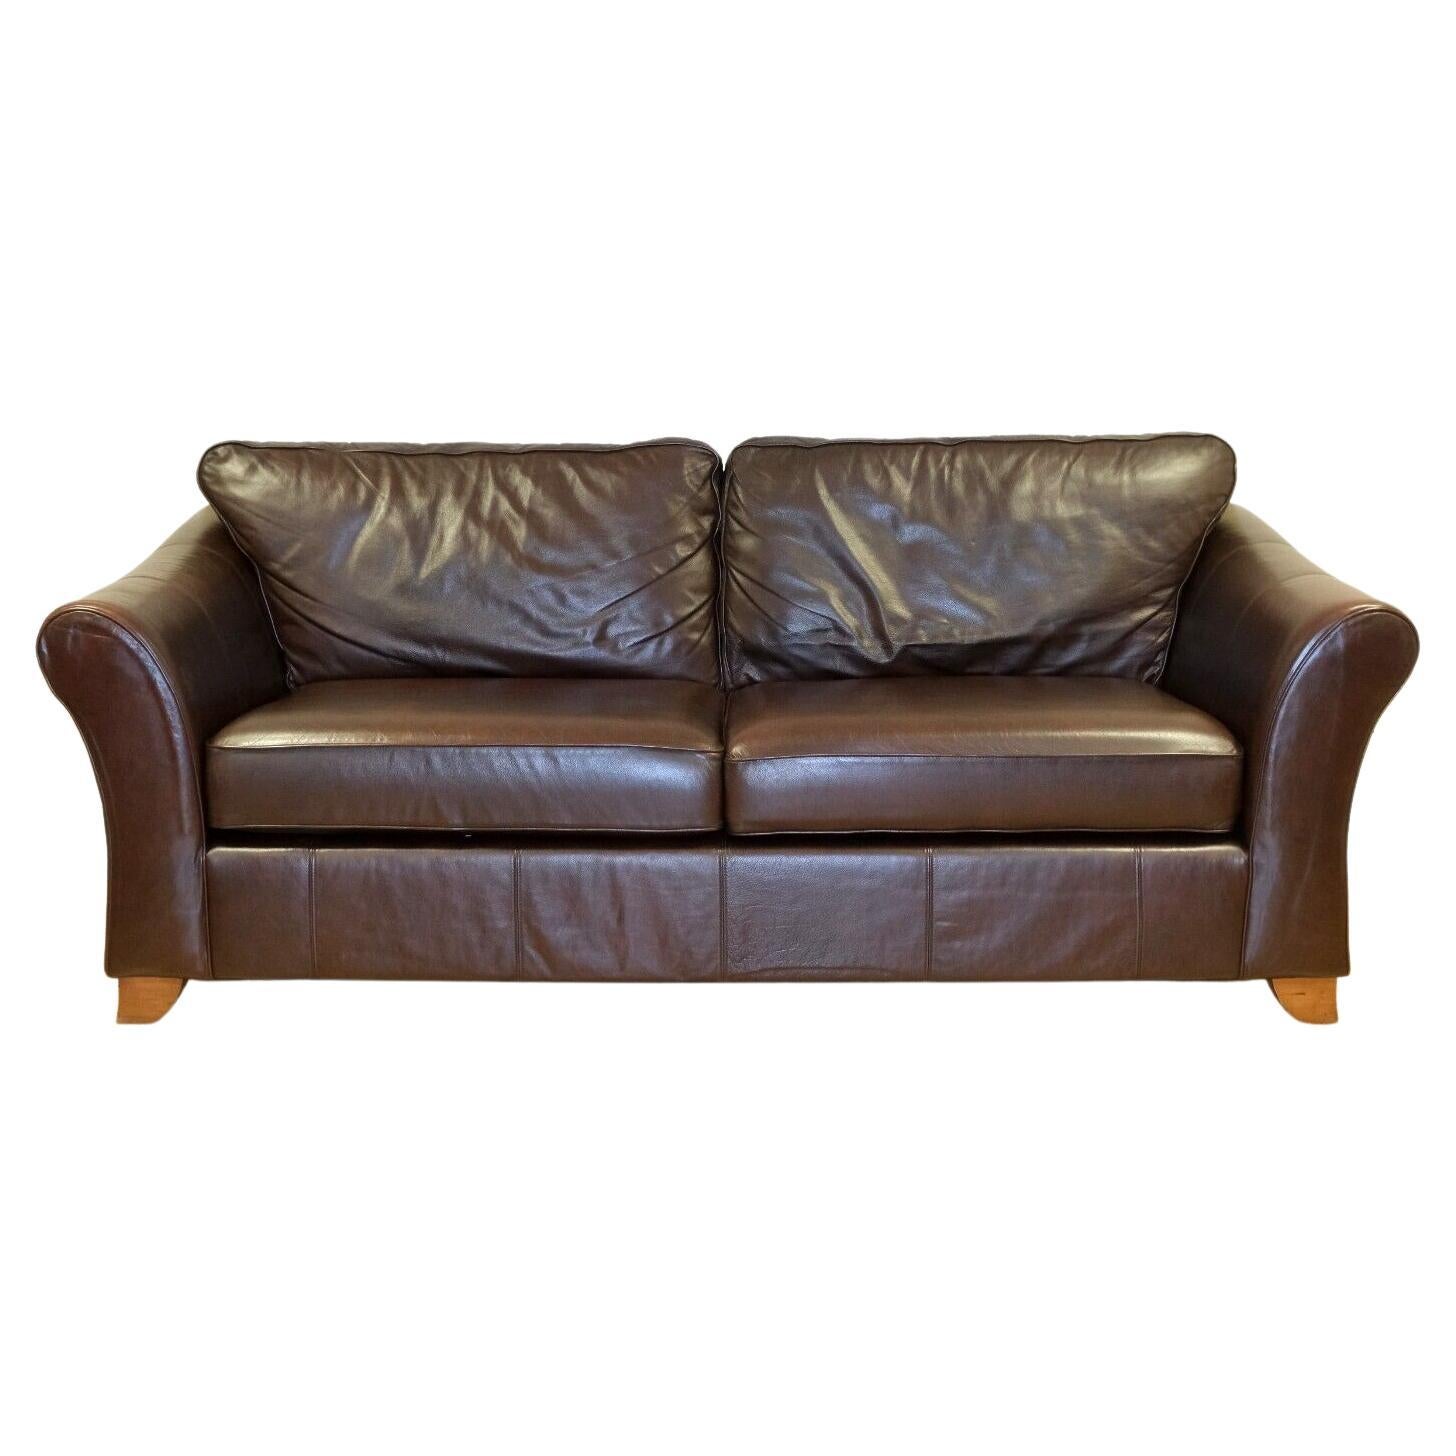 LOVELY MARKS & SPENCER ABBEY BRoWN LEATHER TWO SEATER SOFA ON WOODEN FEET For Sale